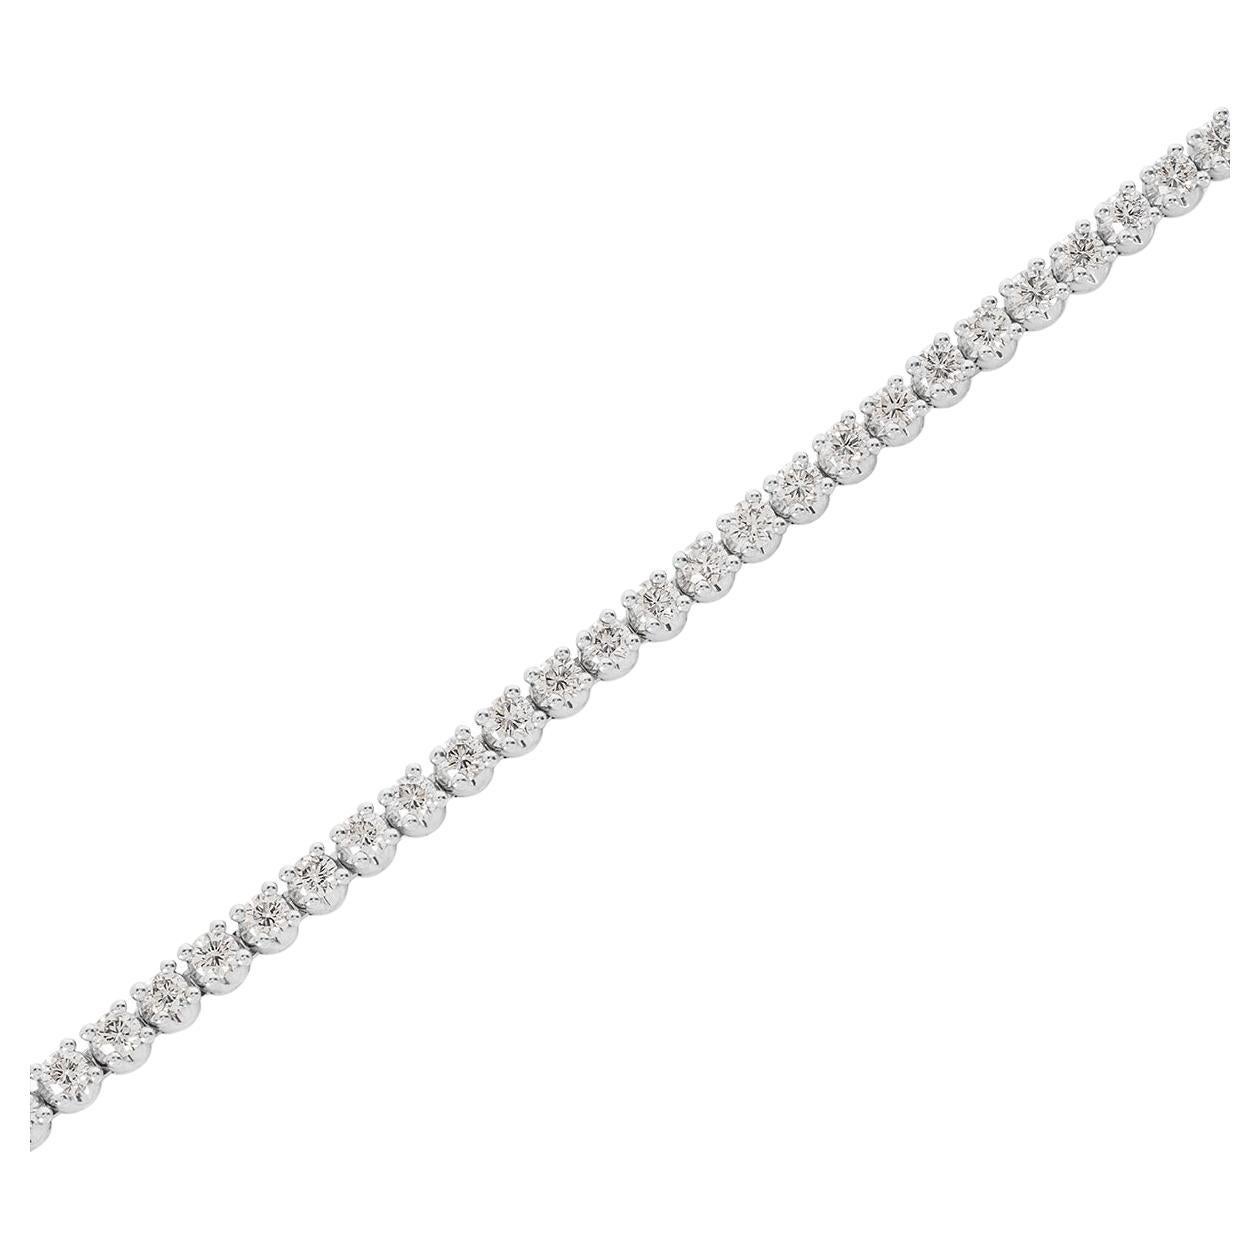 A radiant 18k white gold diamond bracelet by Bvlgari from the Corona collection. The bracelet consists of 44 round brilliant cut diamonds individually set in a four prong setting with an approximate weight of 4.62ct, E-F colour and VS clarity. The